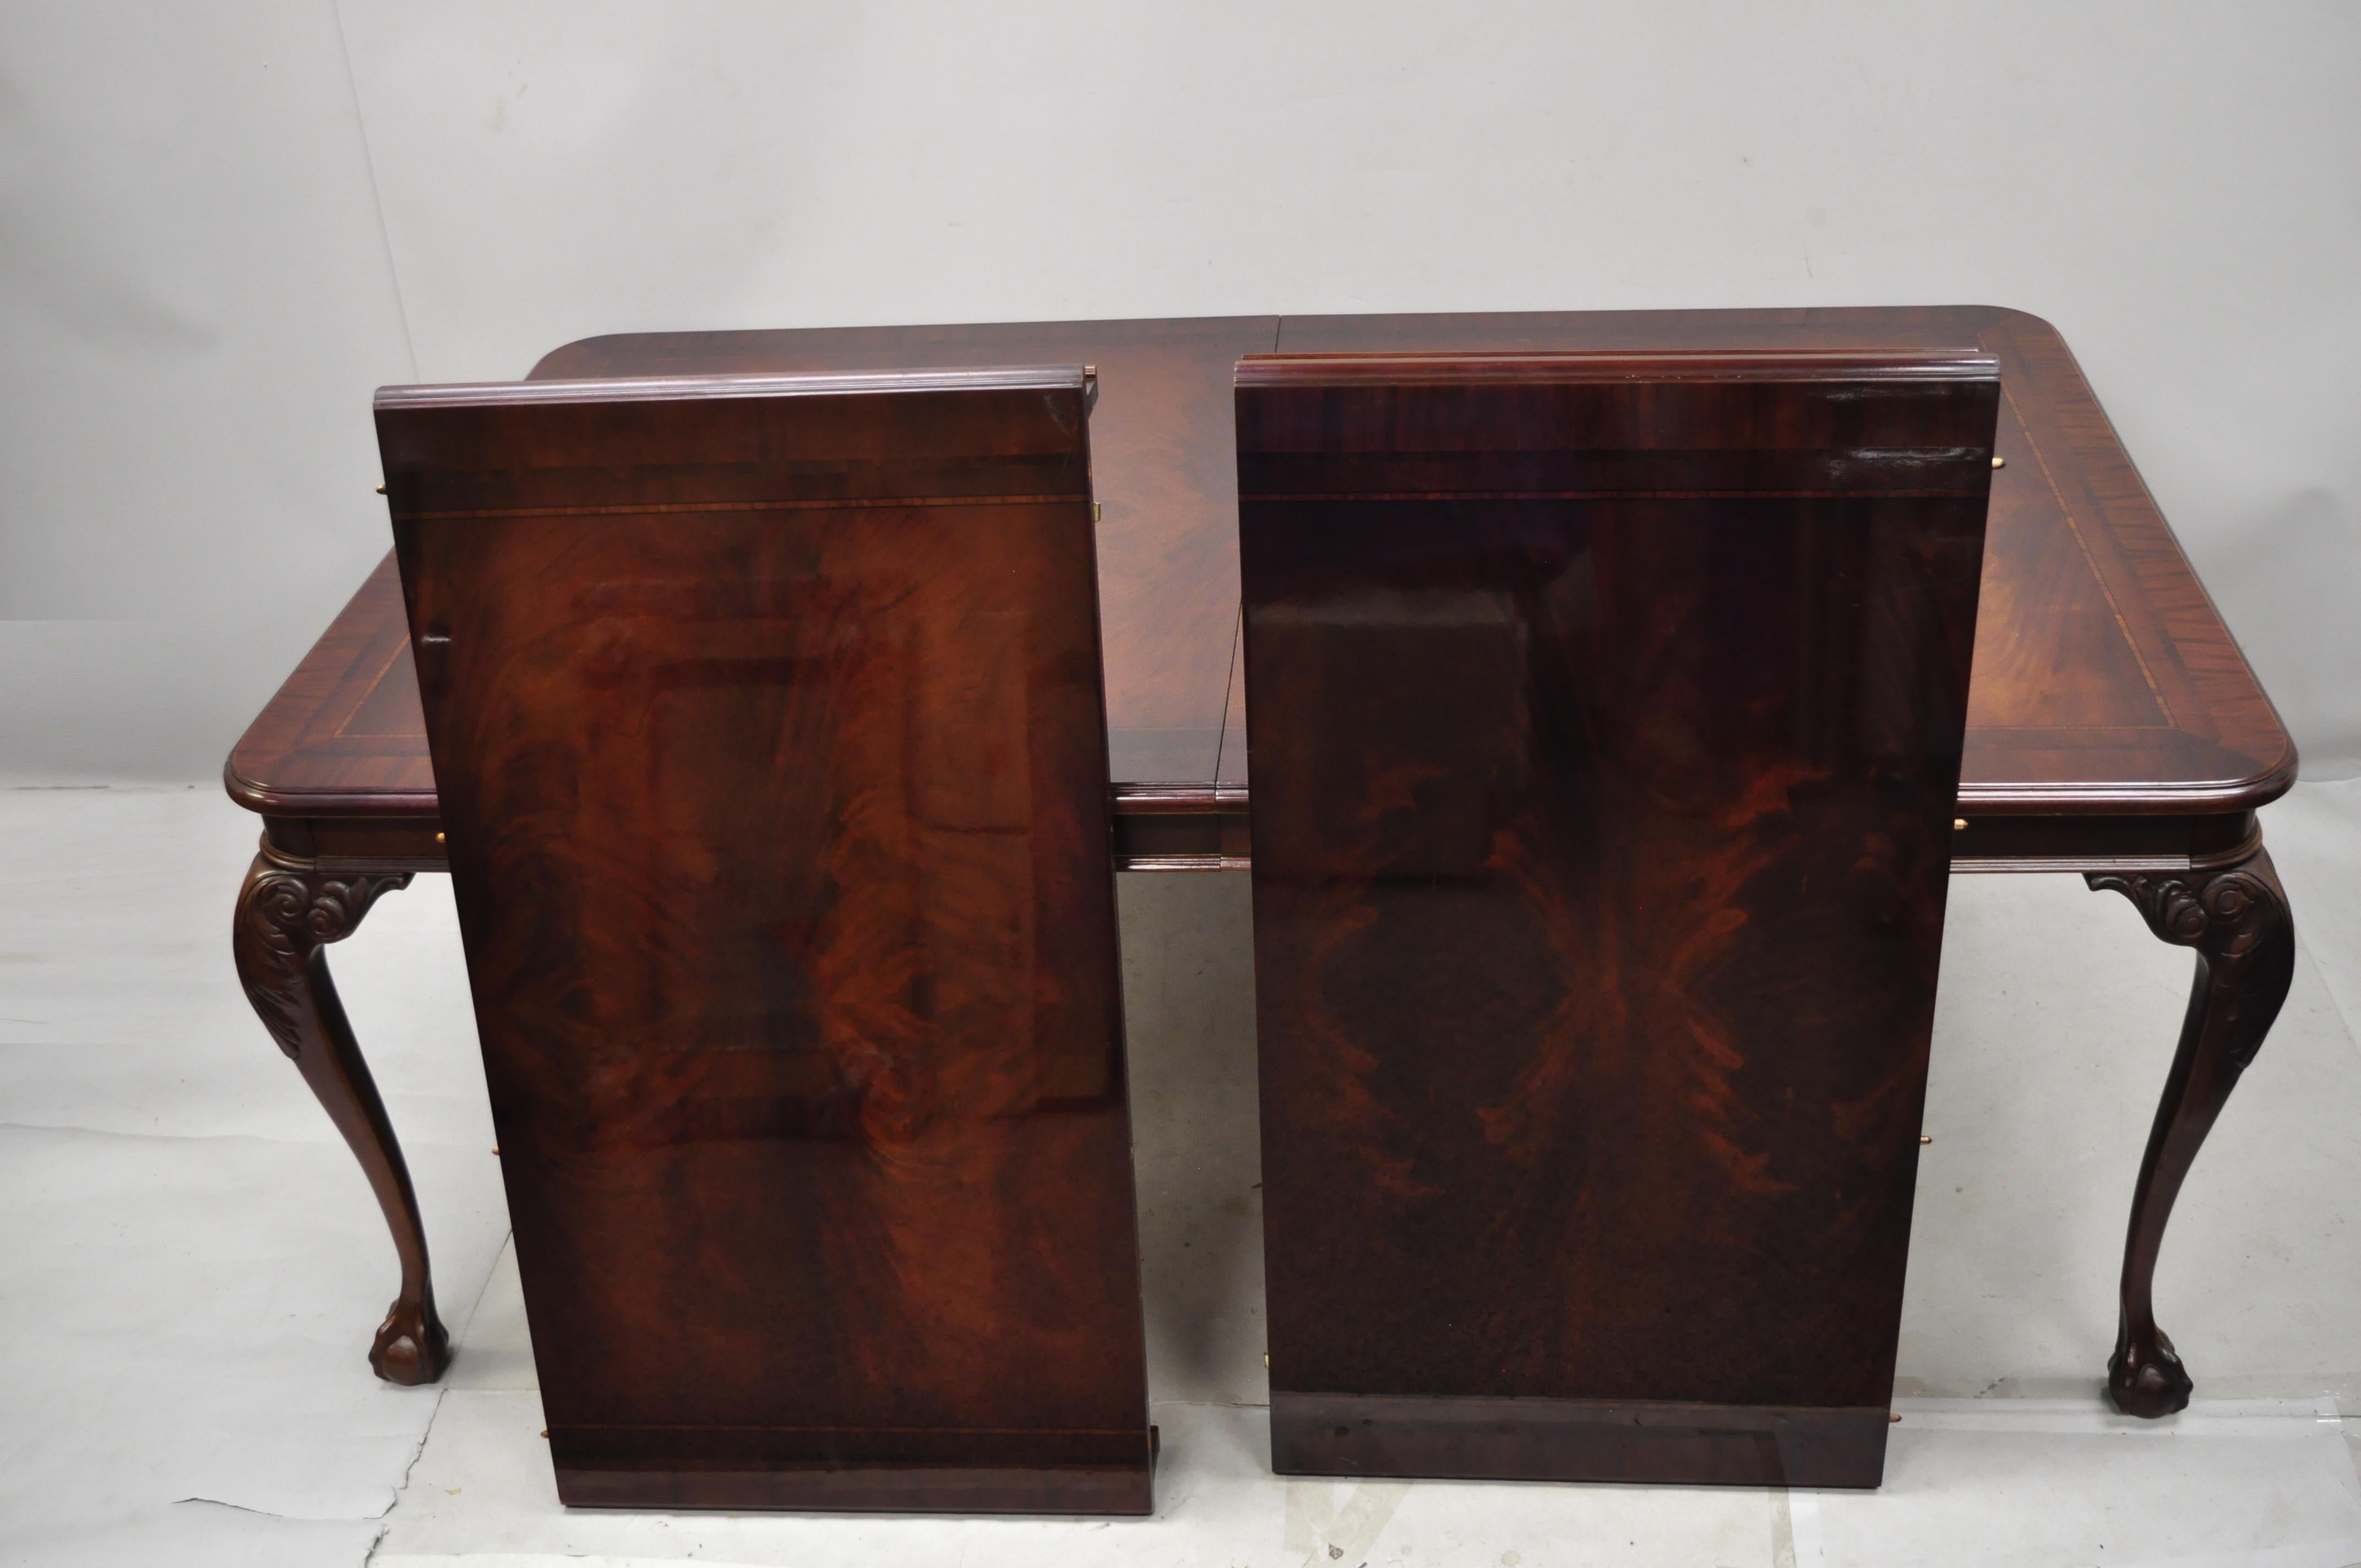 Bernhardt Centennial Georgian Chippendale Mahogany Dining Table with 2 Leaves For Sale 1